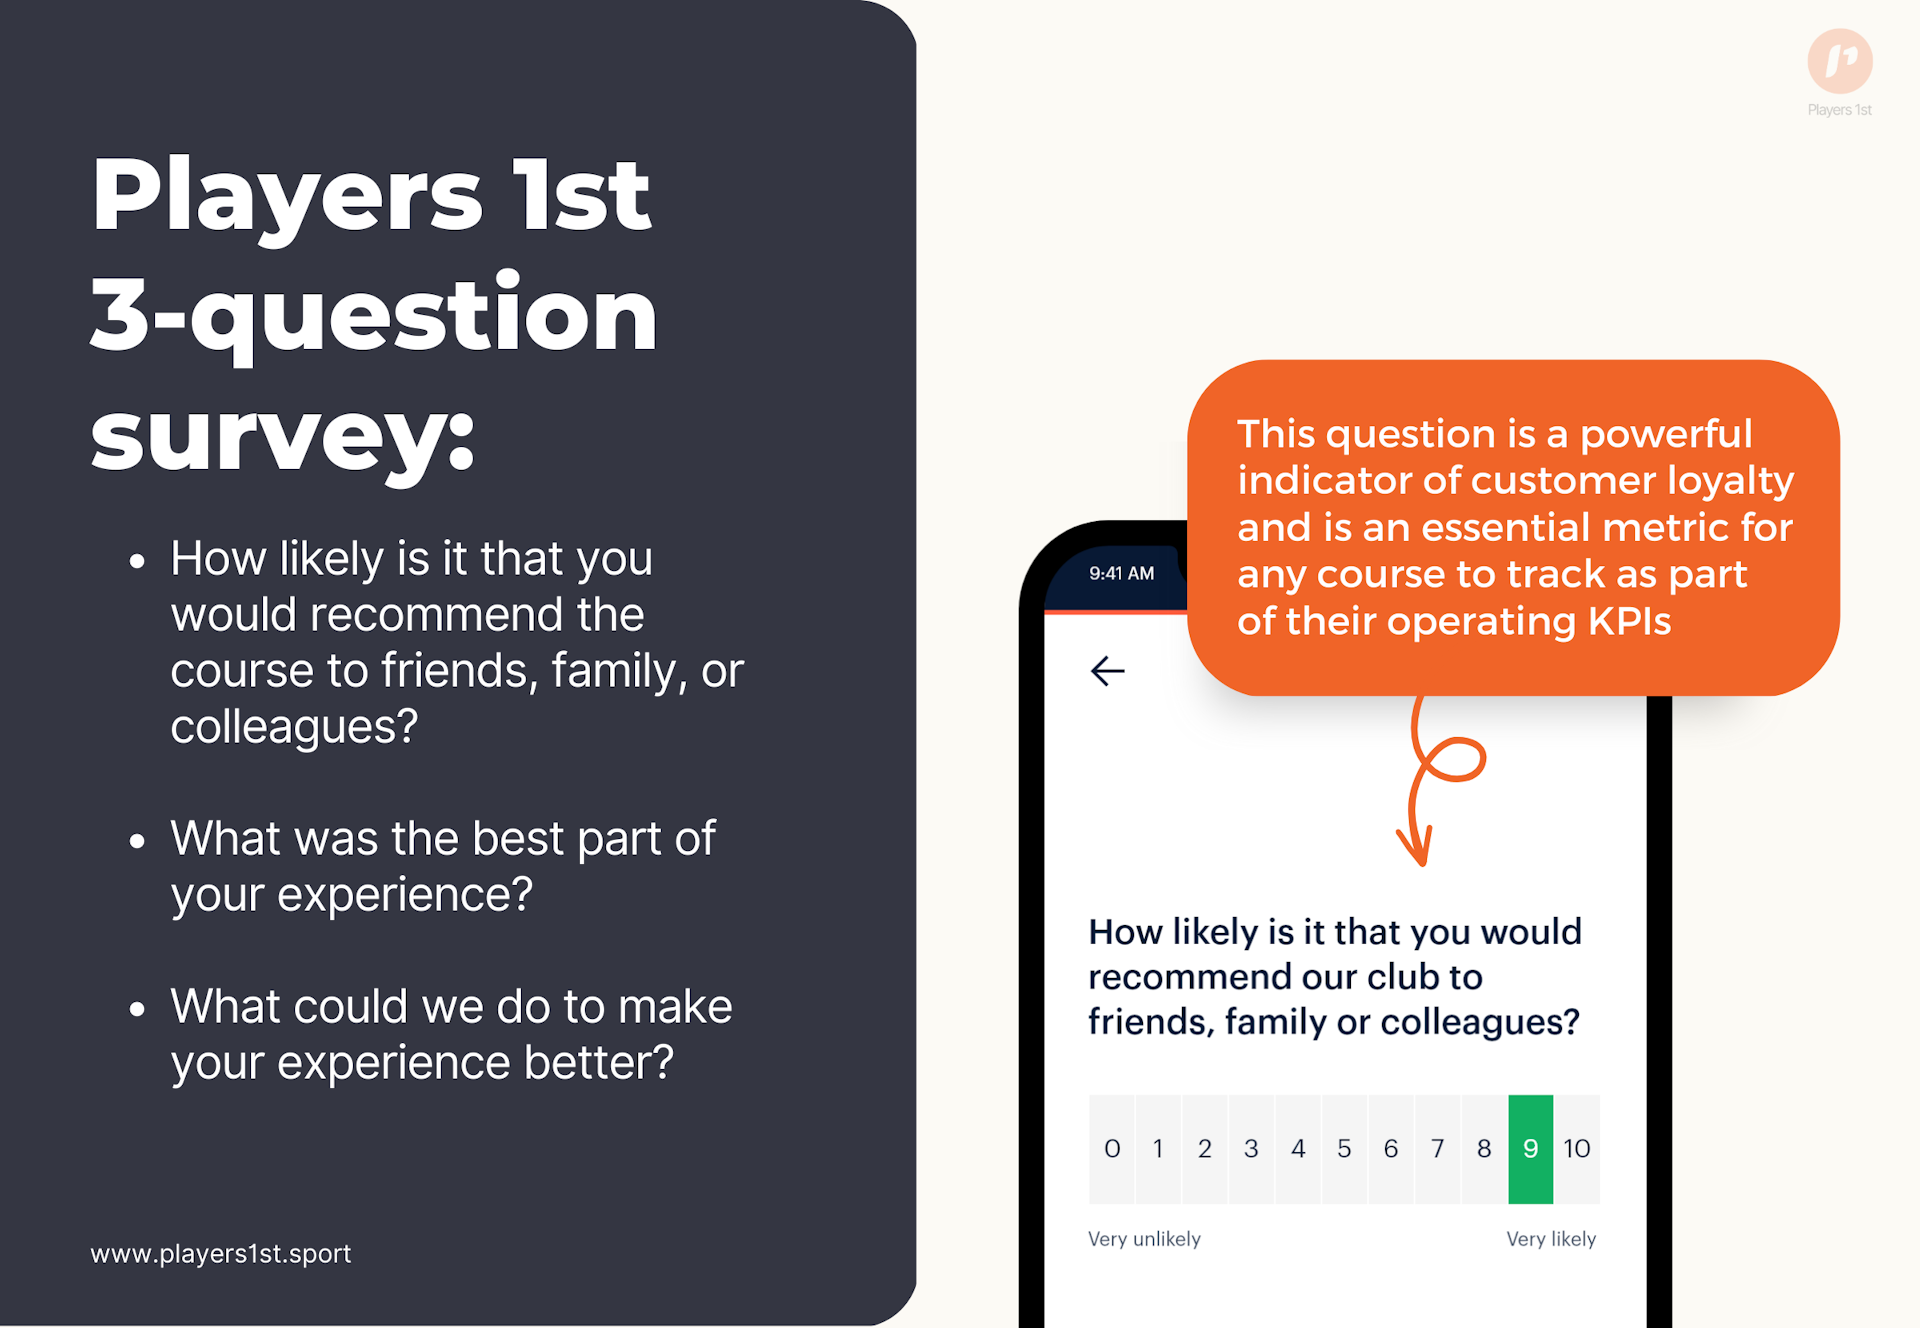 Players 1st Digital Comment Card Survey consists of 3 questions.